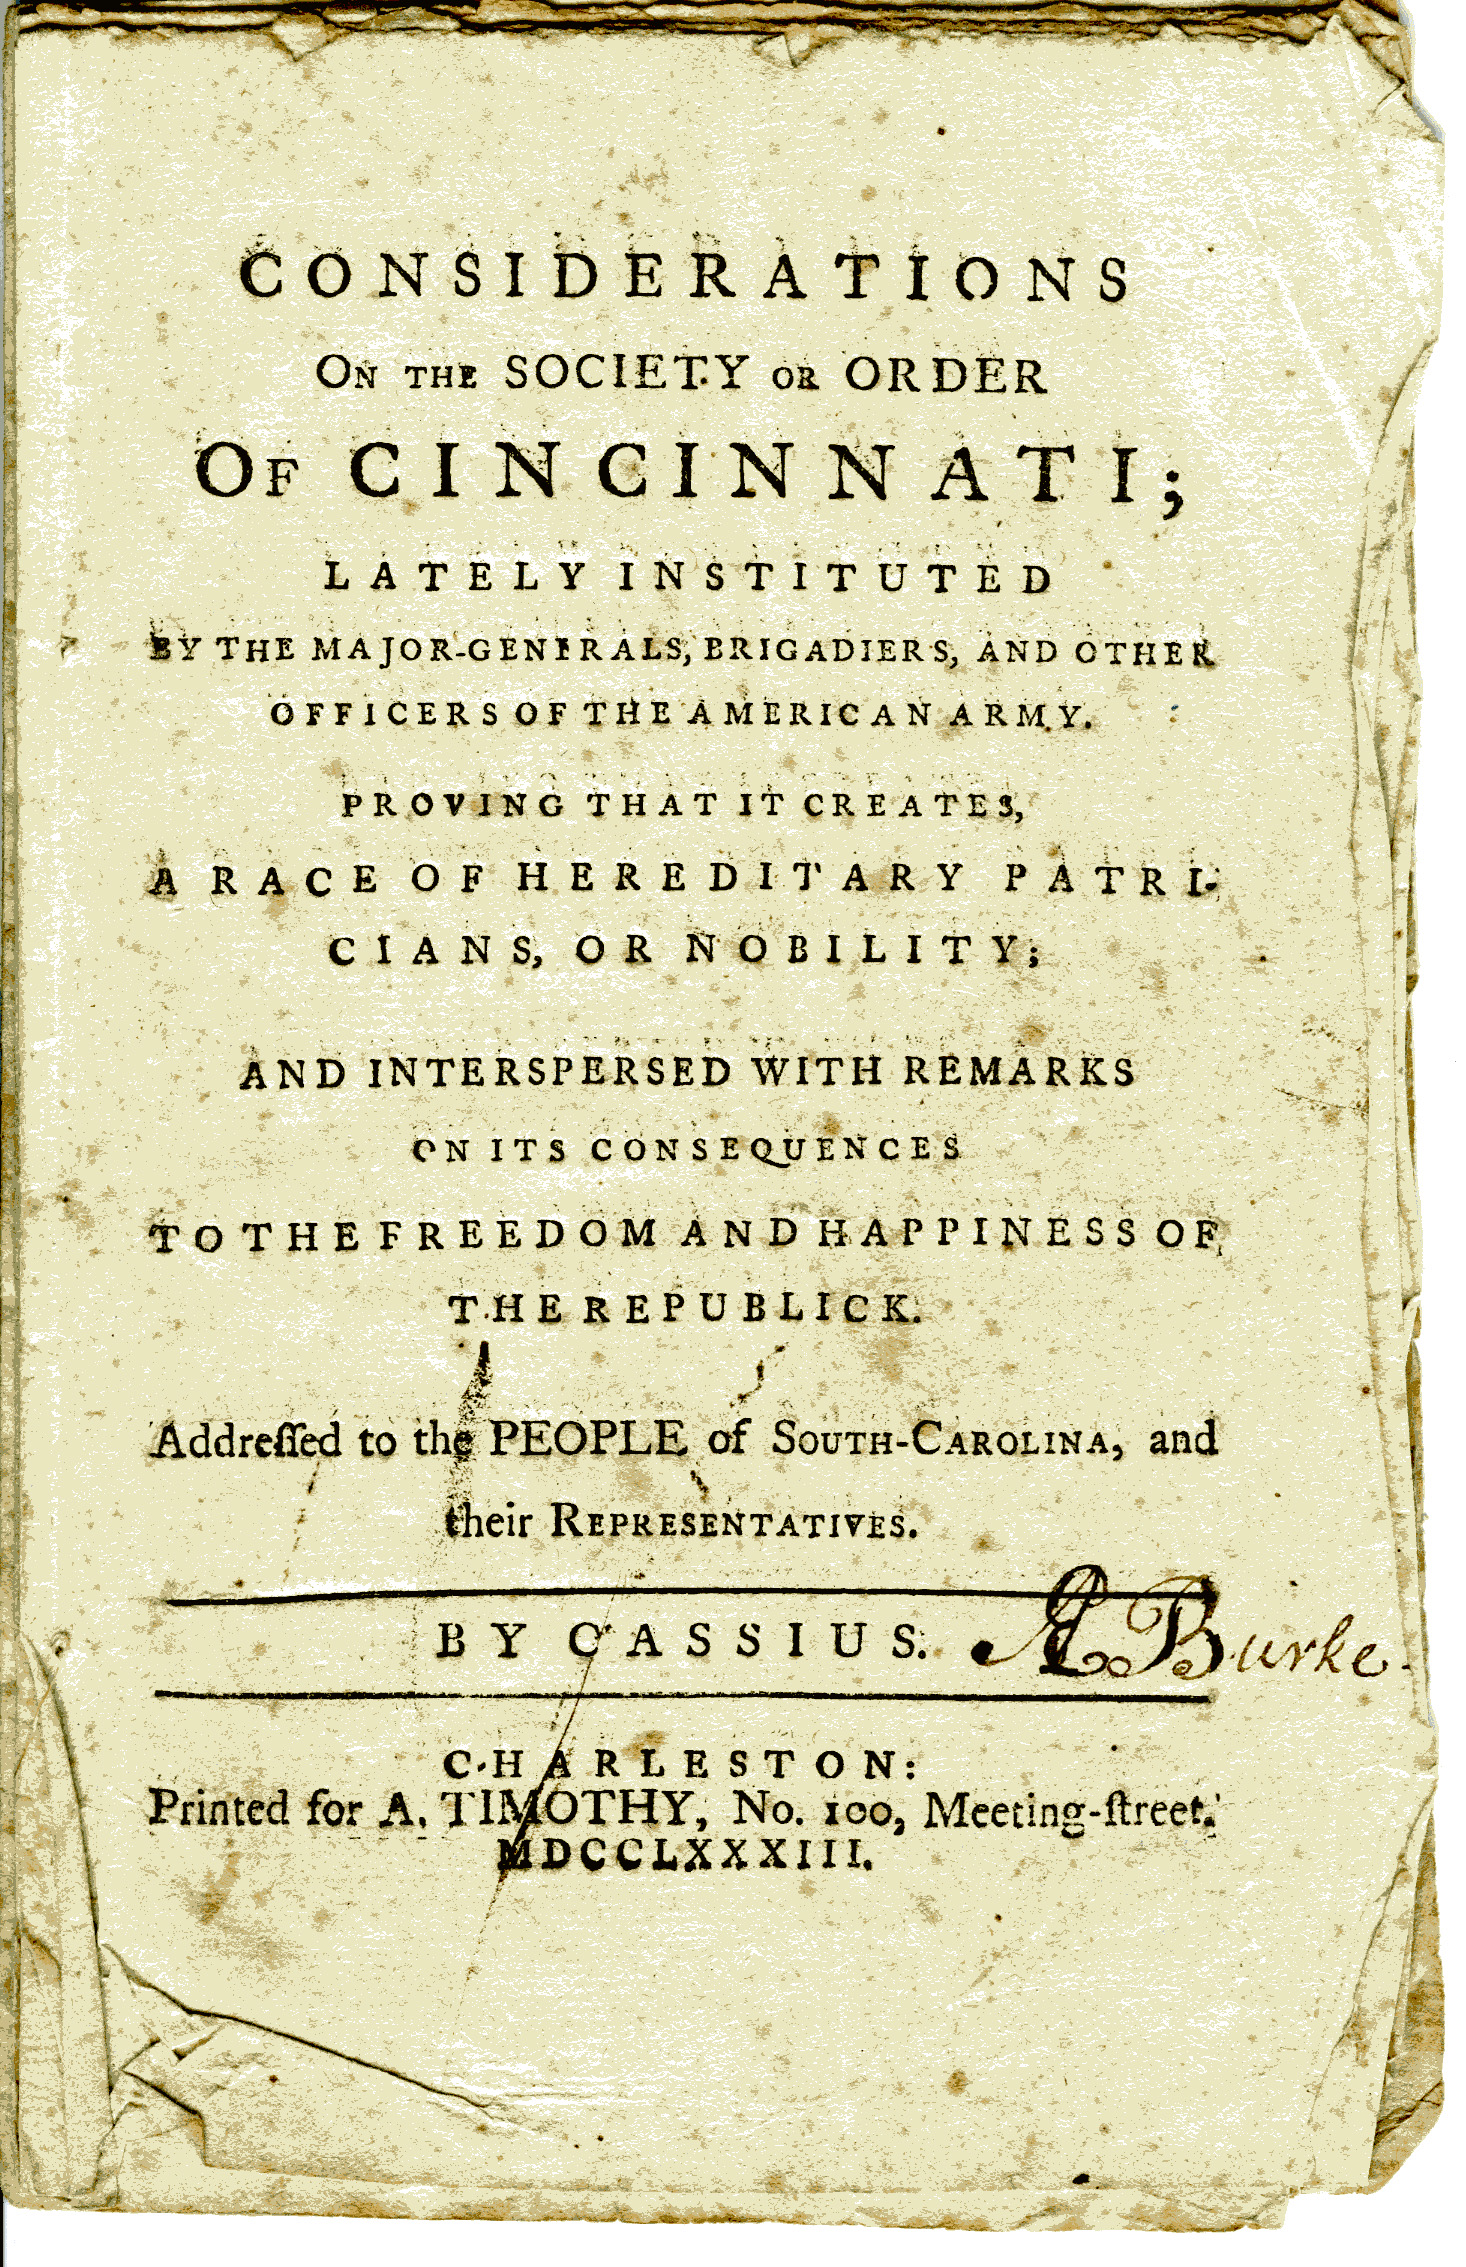 Considerations on the Society or Order of Cincinnati; Lately Instituted by the Major-Generals, Brigadiers, and Other Officers of the American Army, Aedanus Burke, Charleston: Printed for A. Timothy, 1783